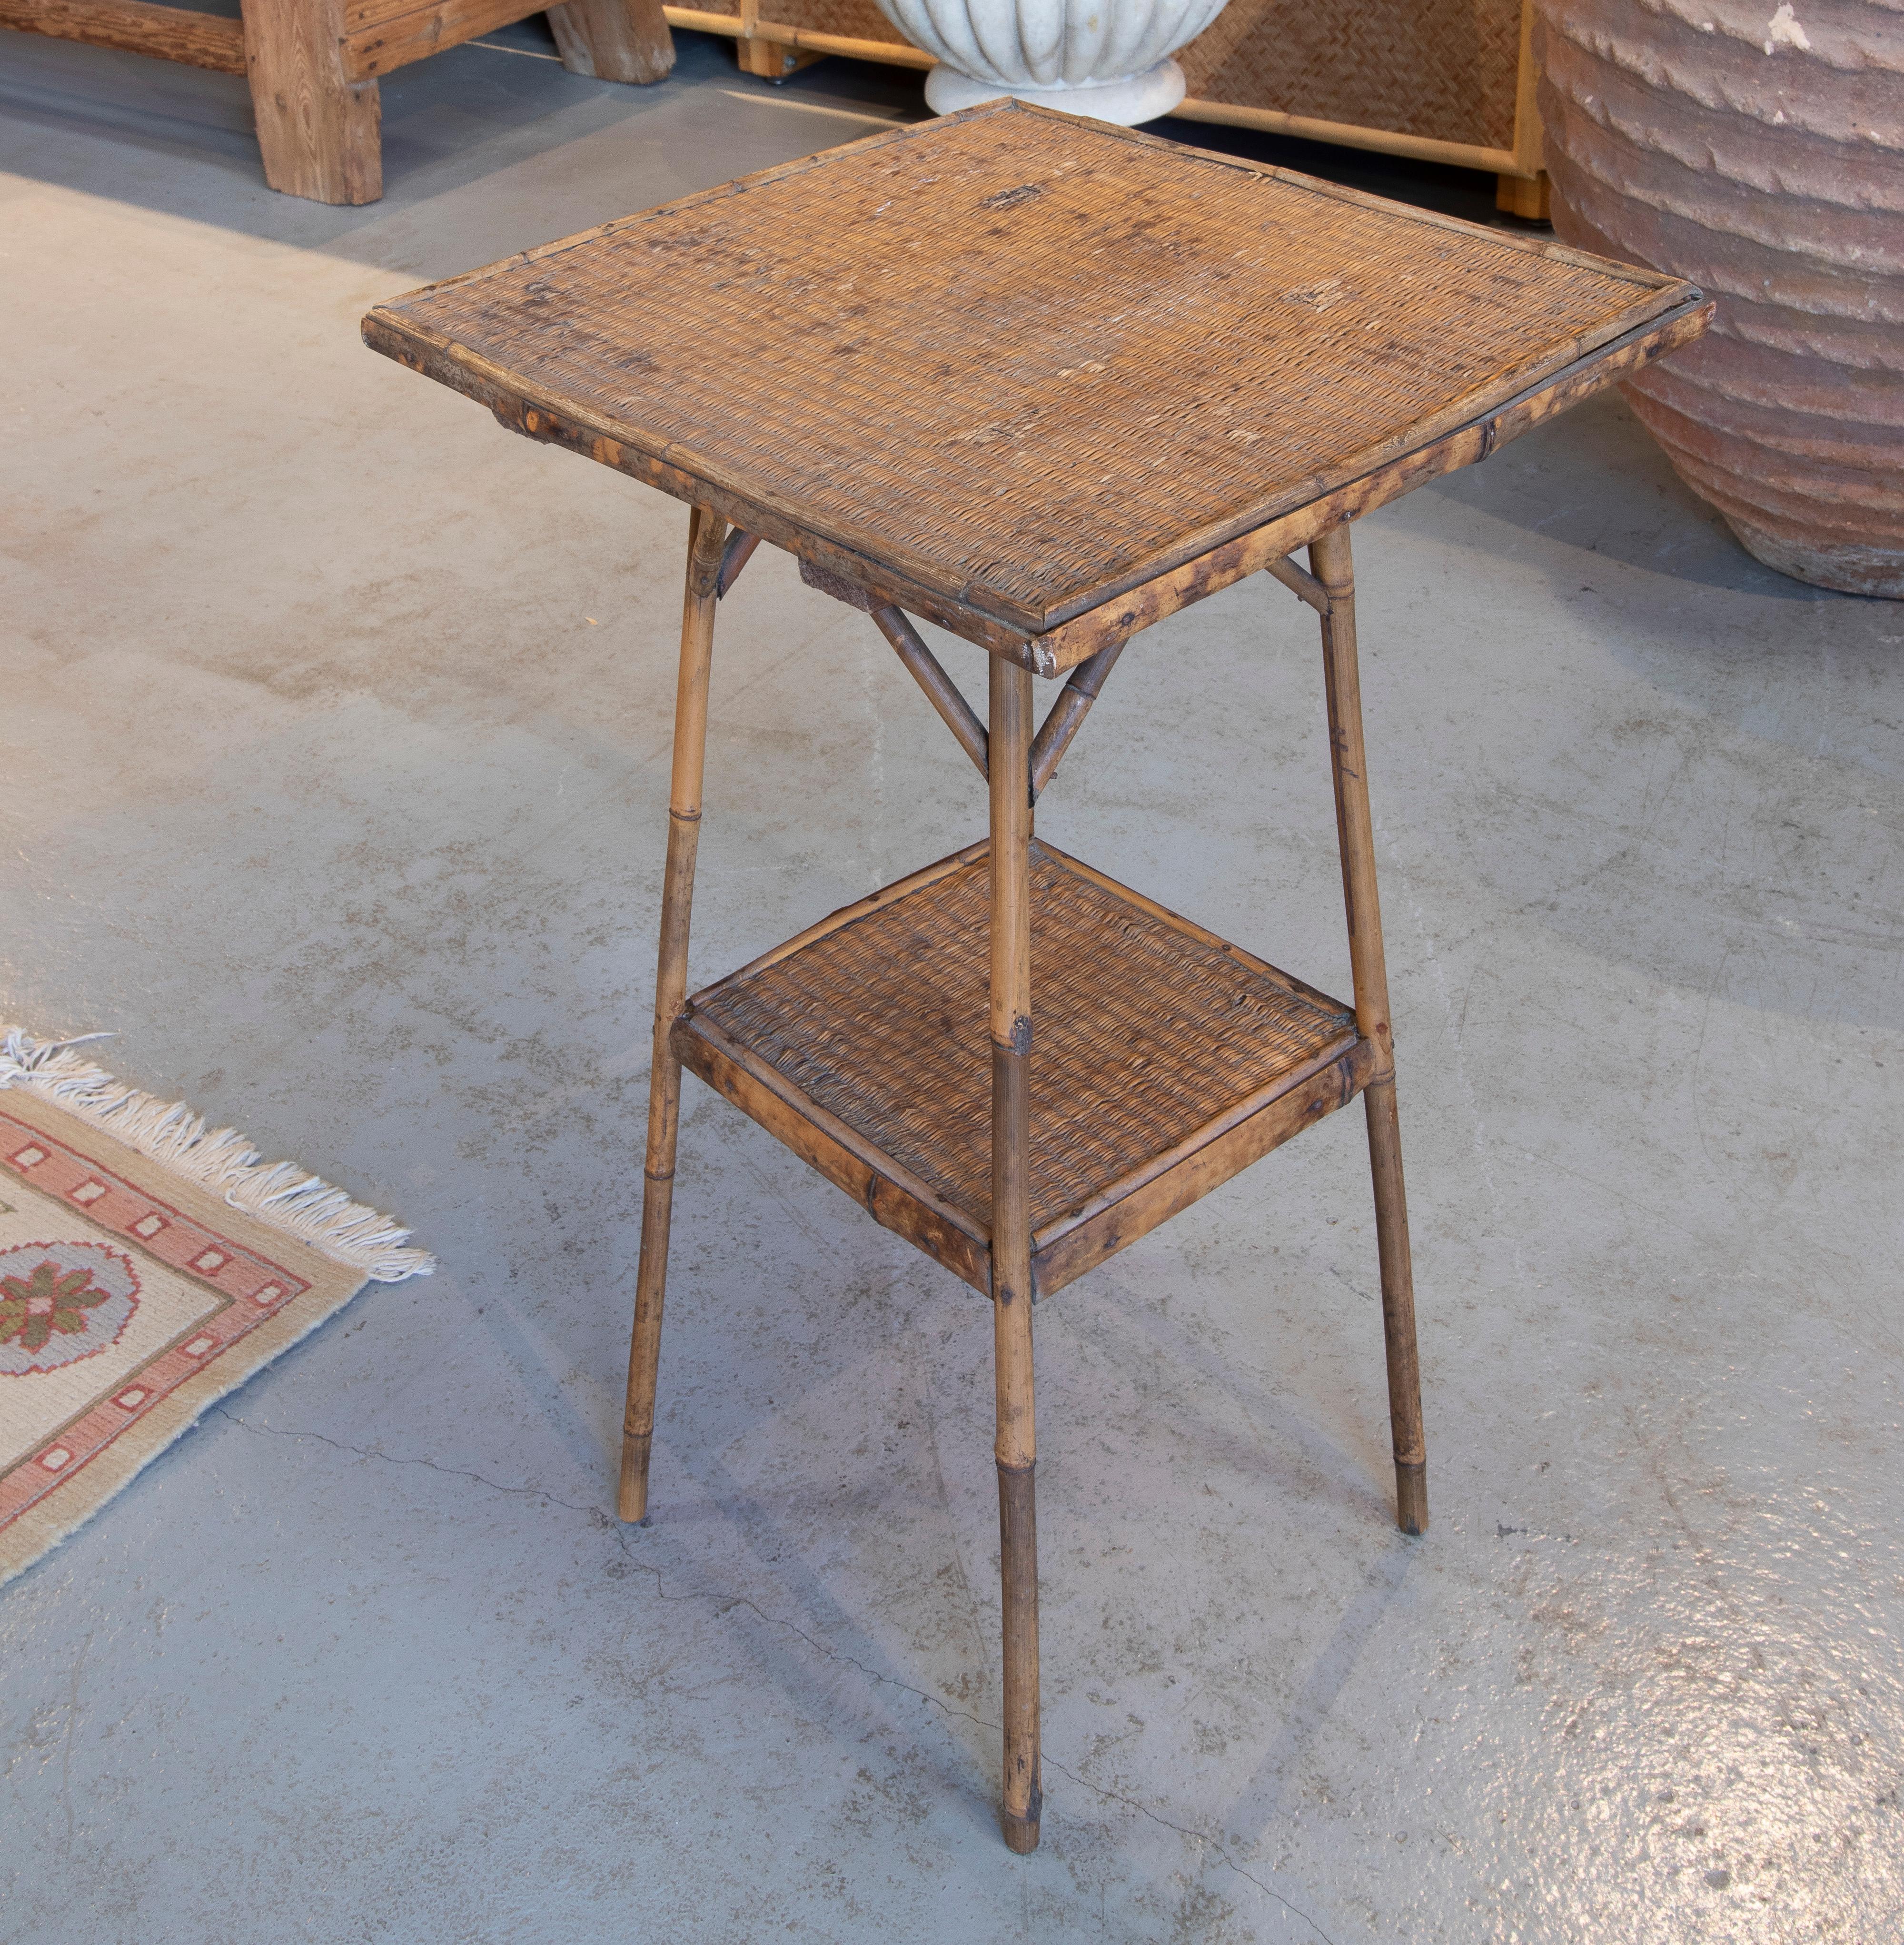 Vintage 1950s Chinese bamboo and woven wicker 1-shelf tall side table.